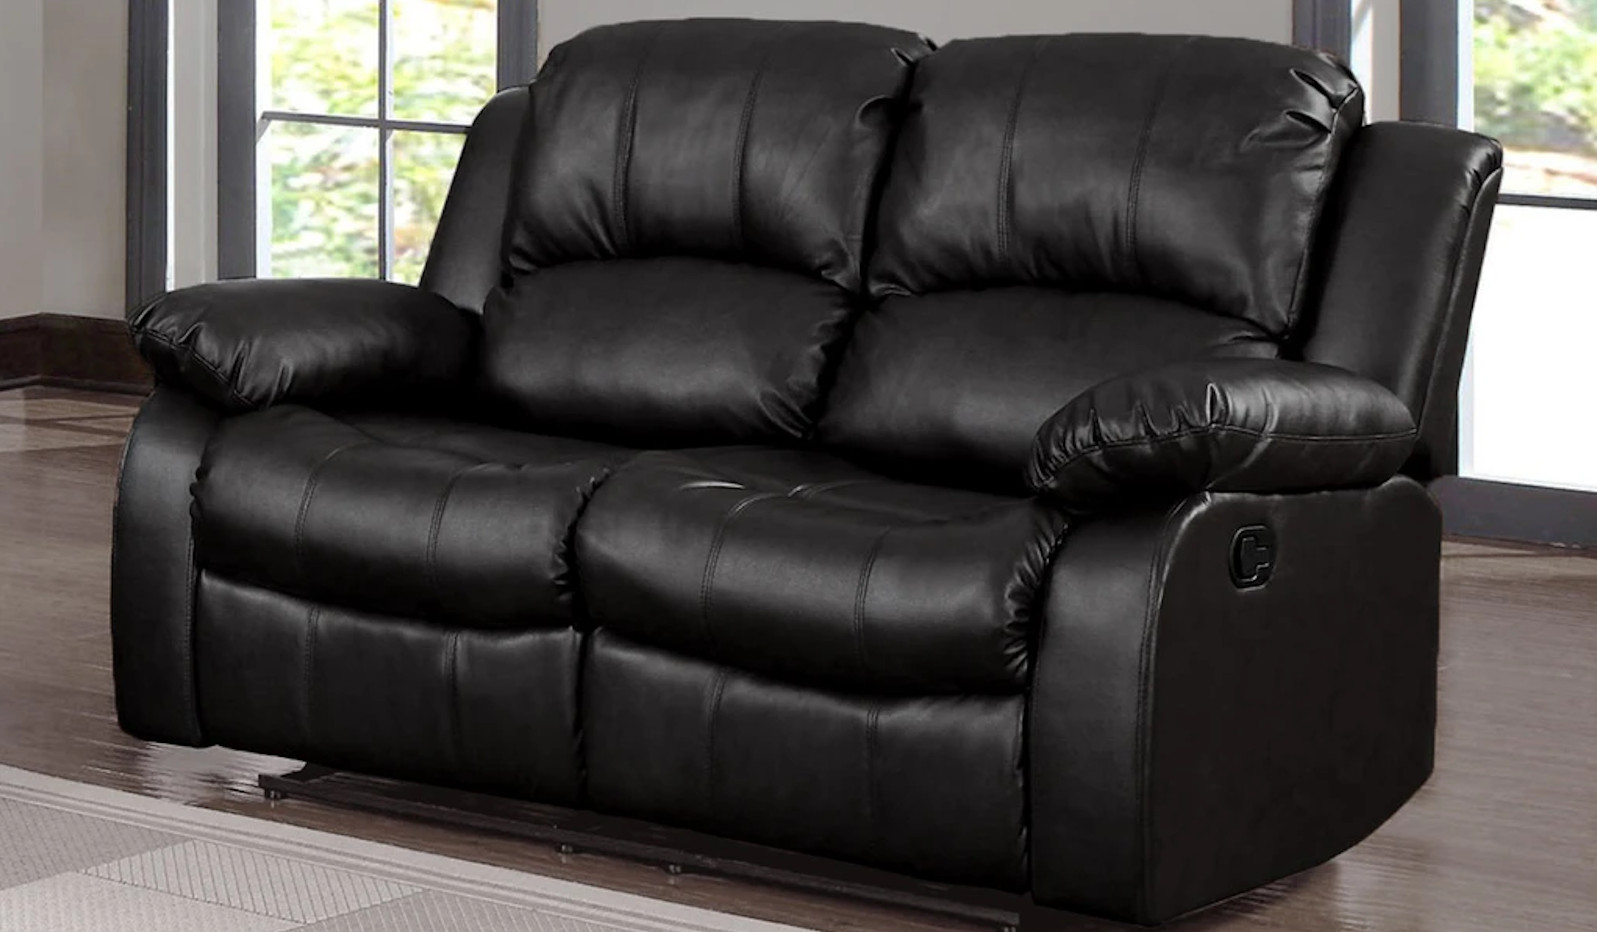 Affordable Price recliners